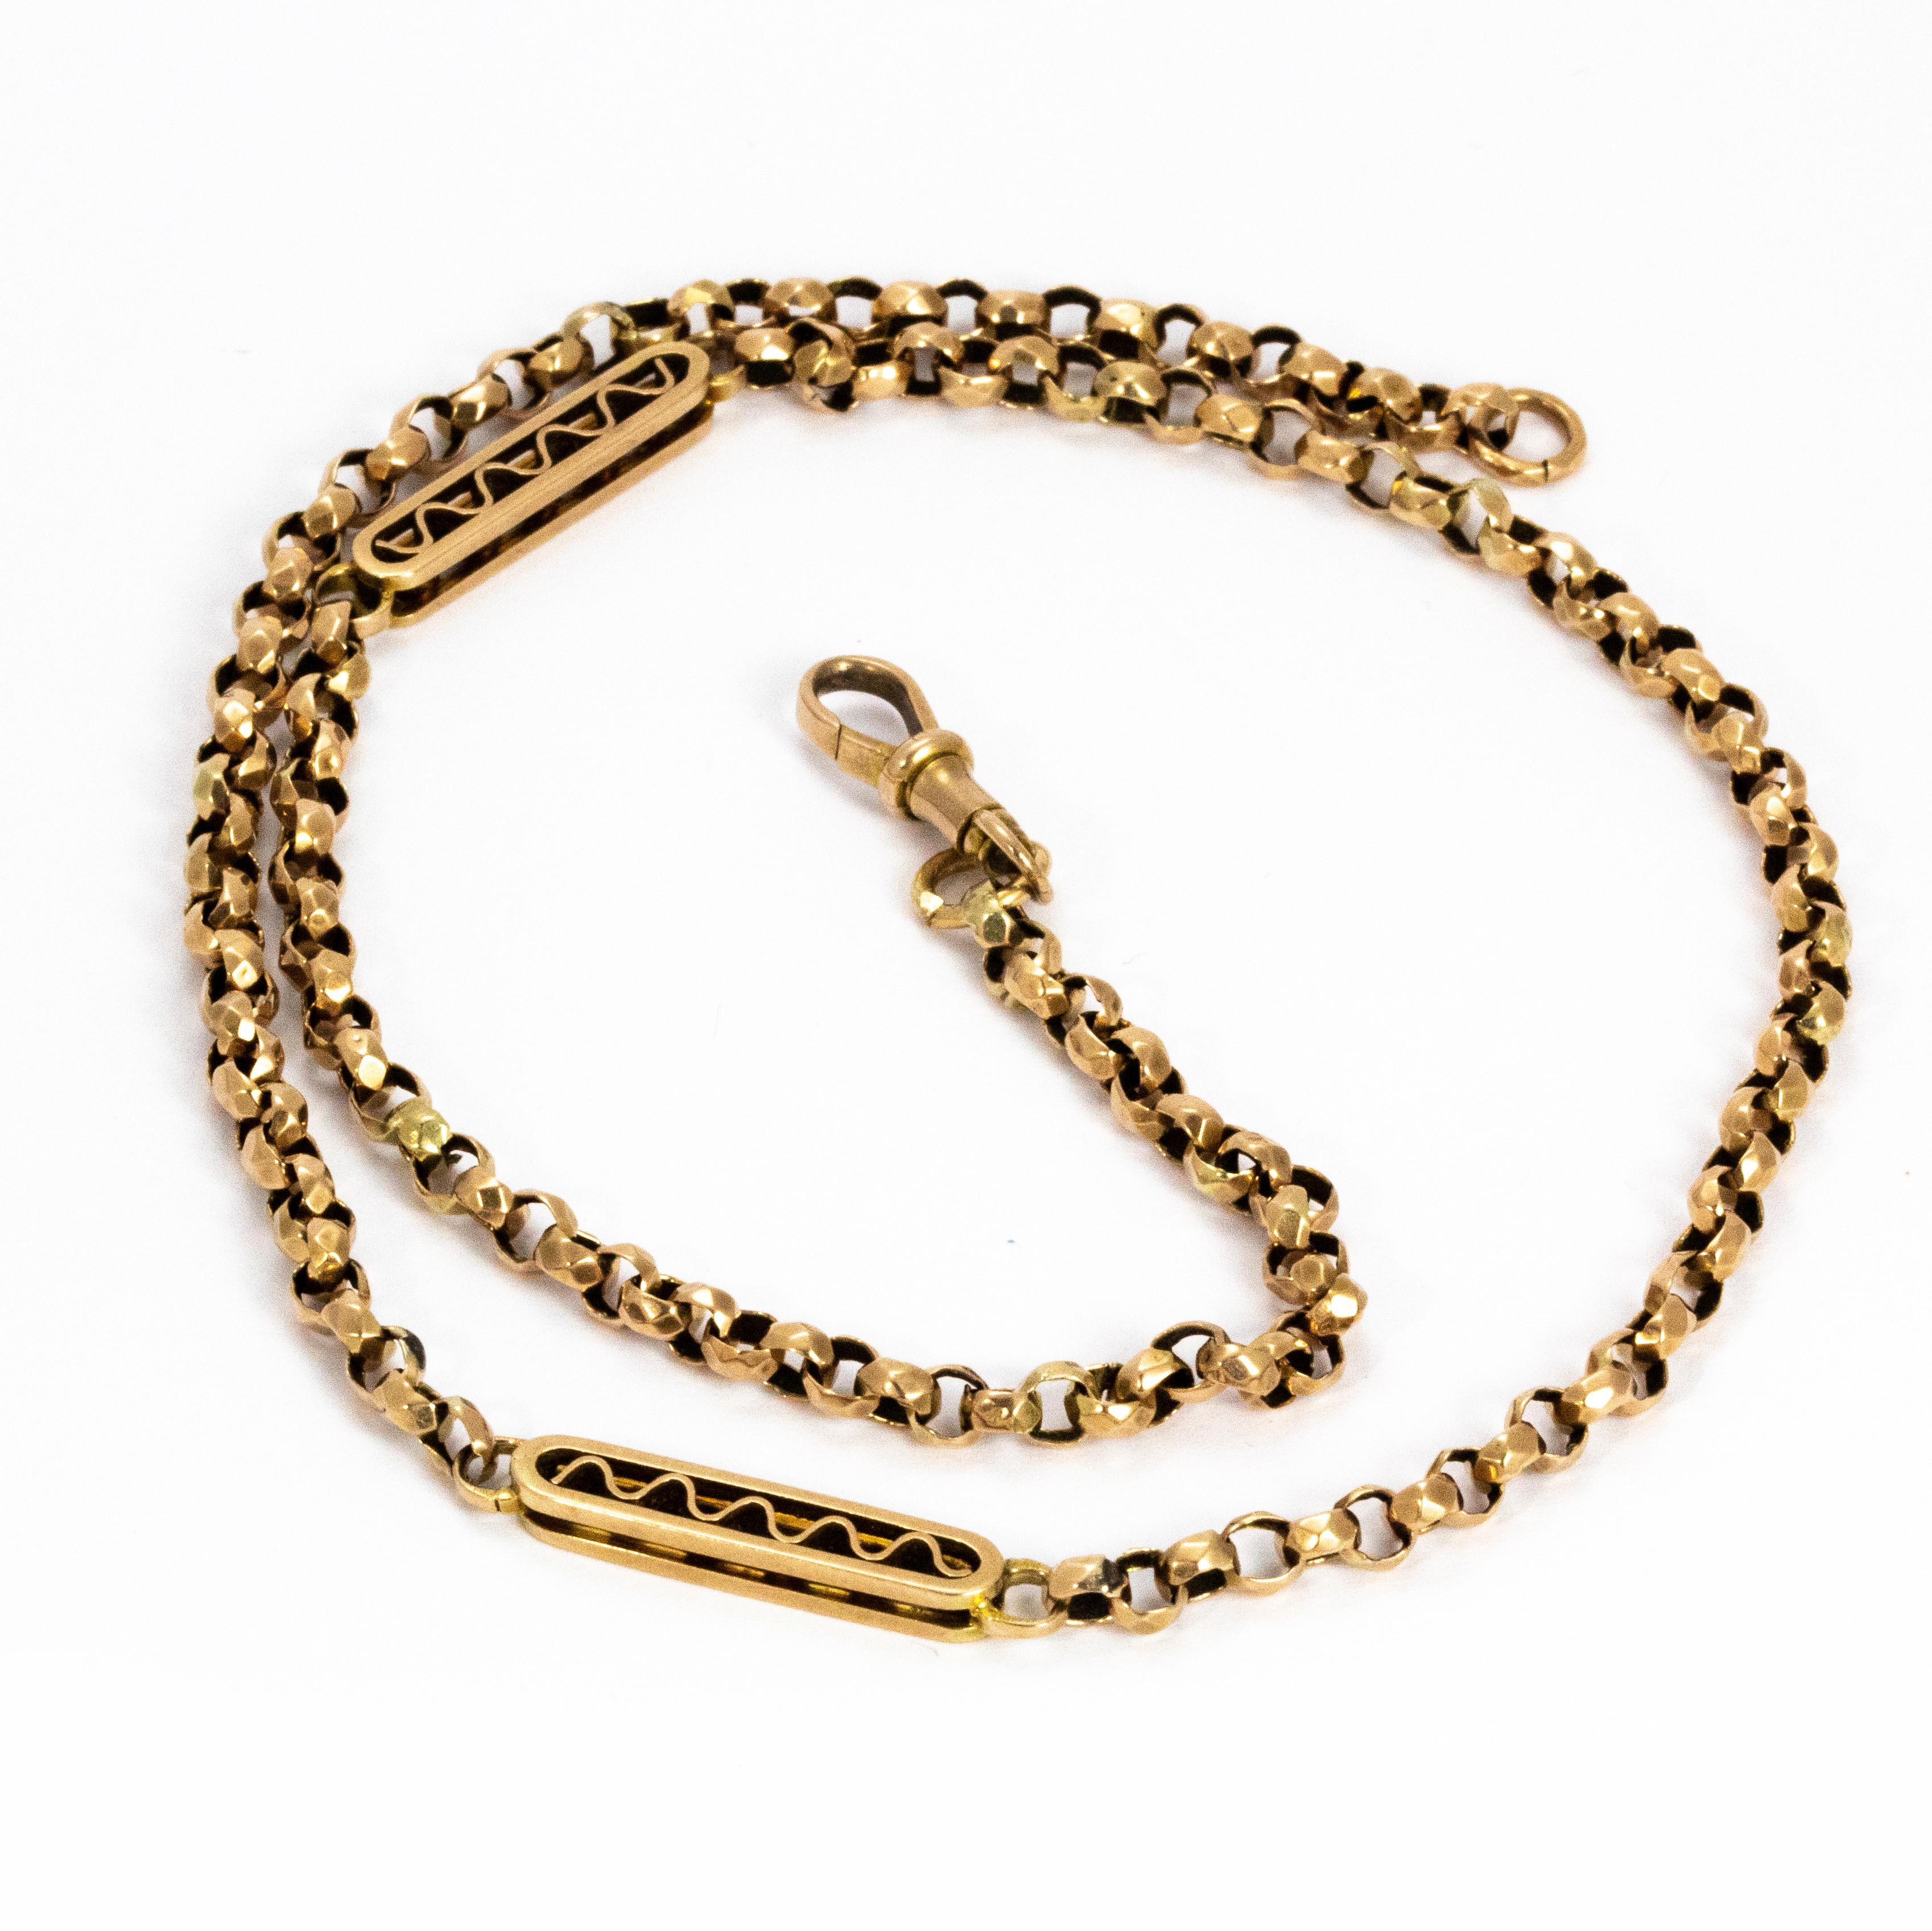 Late Victorian charming loop chain and link 9ct necklace.

Necklace length: 20.5inches